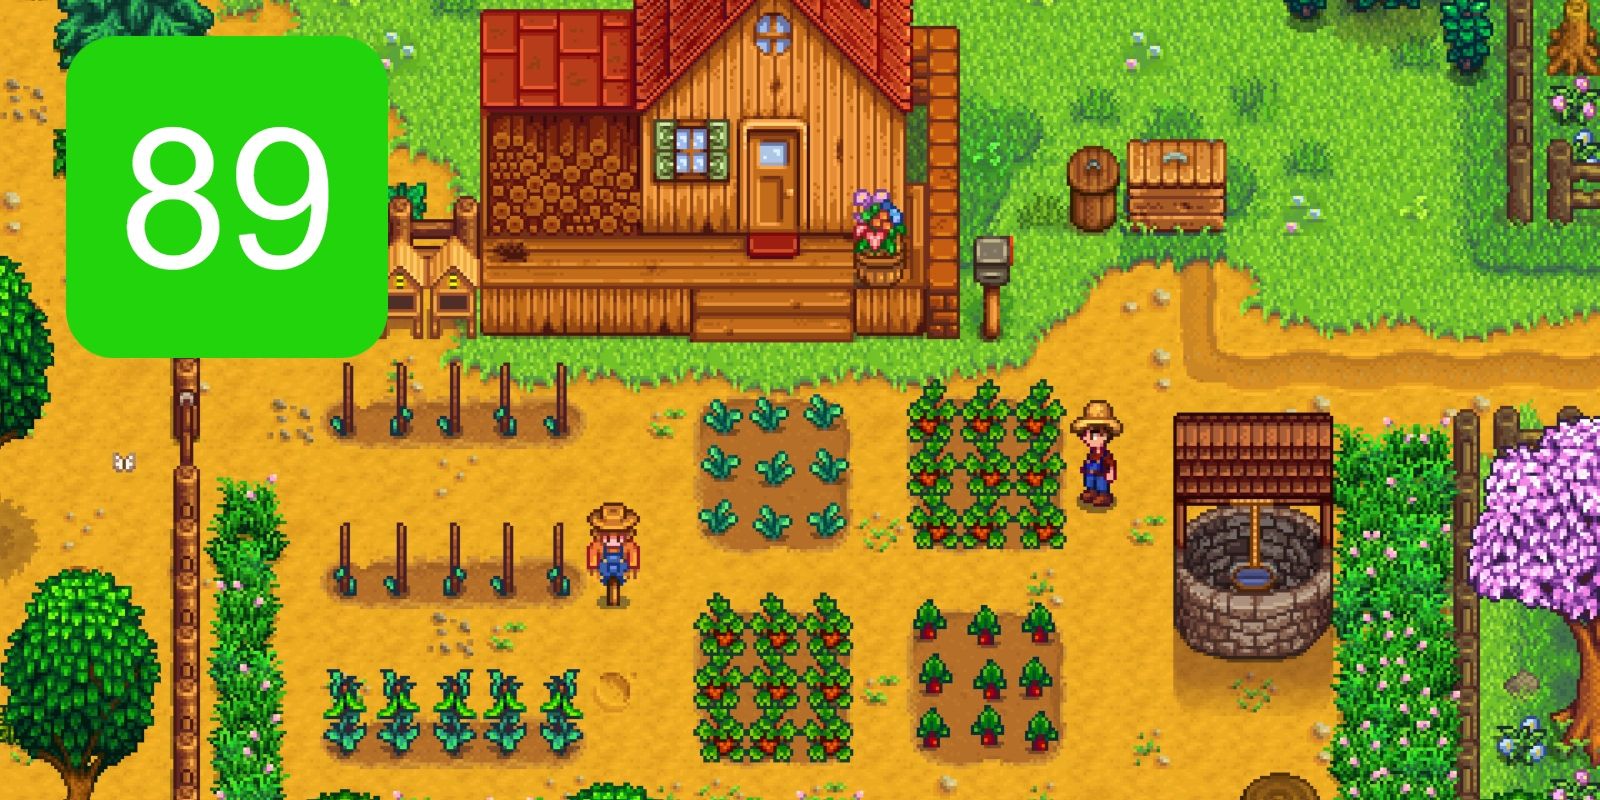 The Xbox One Metascore for Stardew Valley